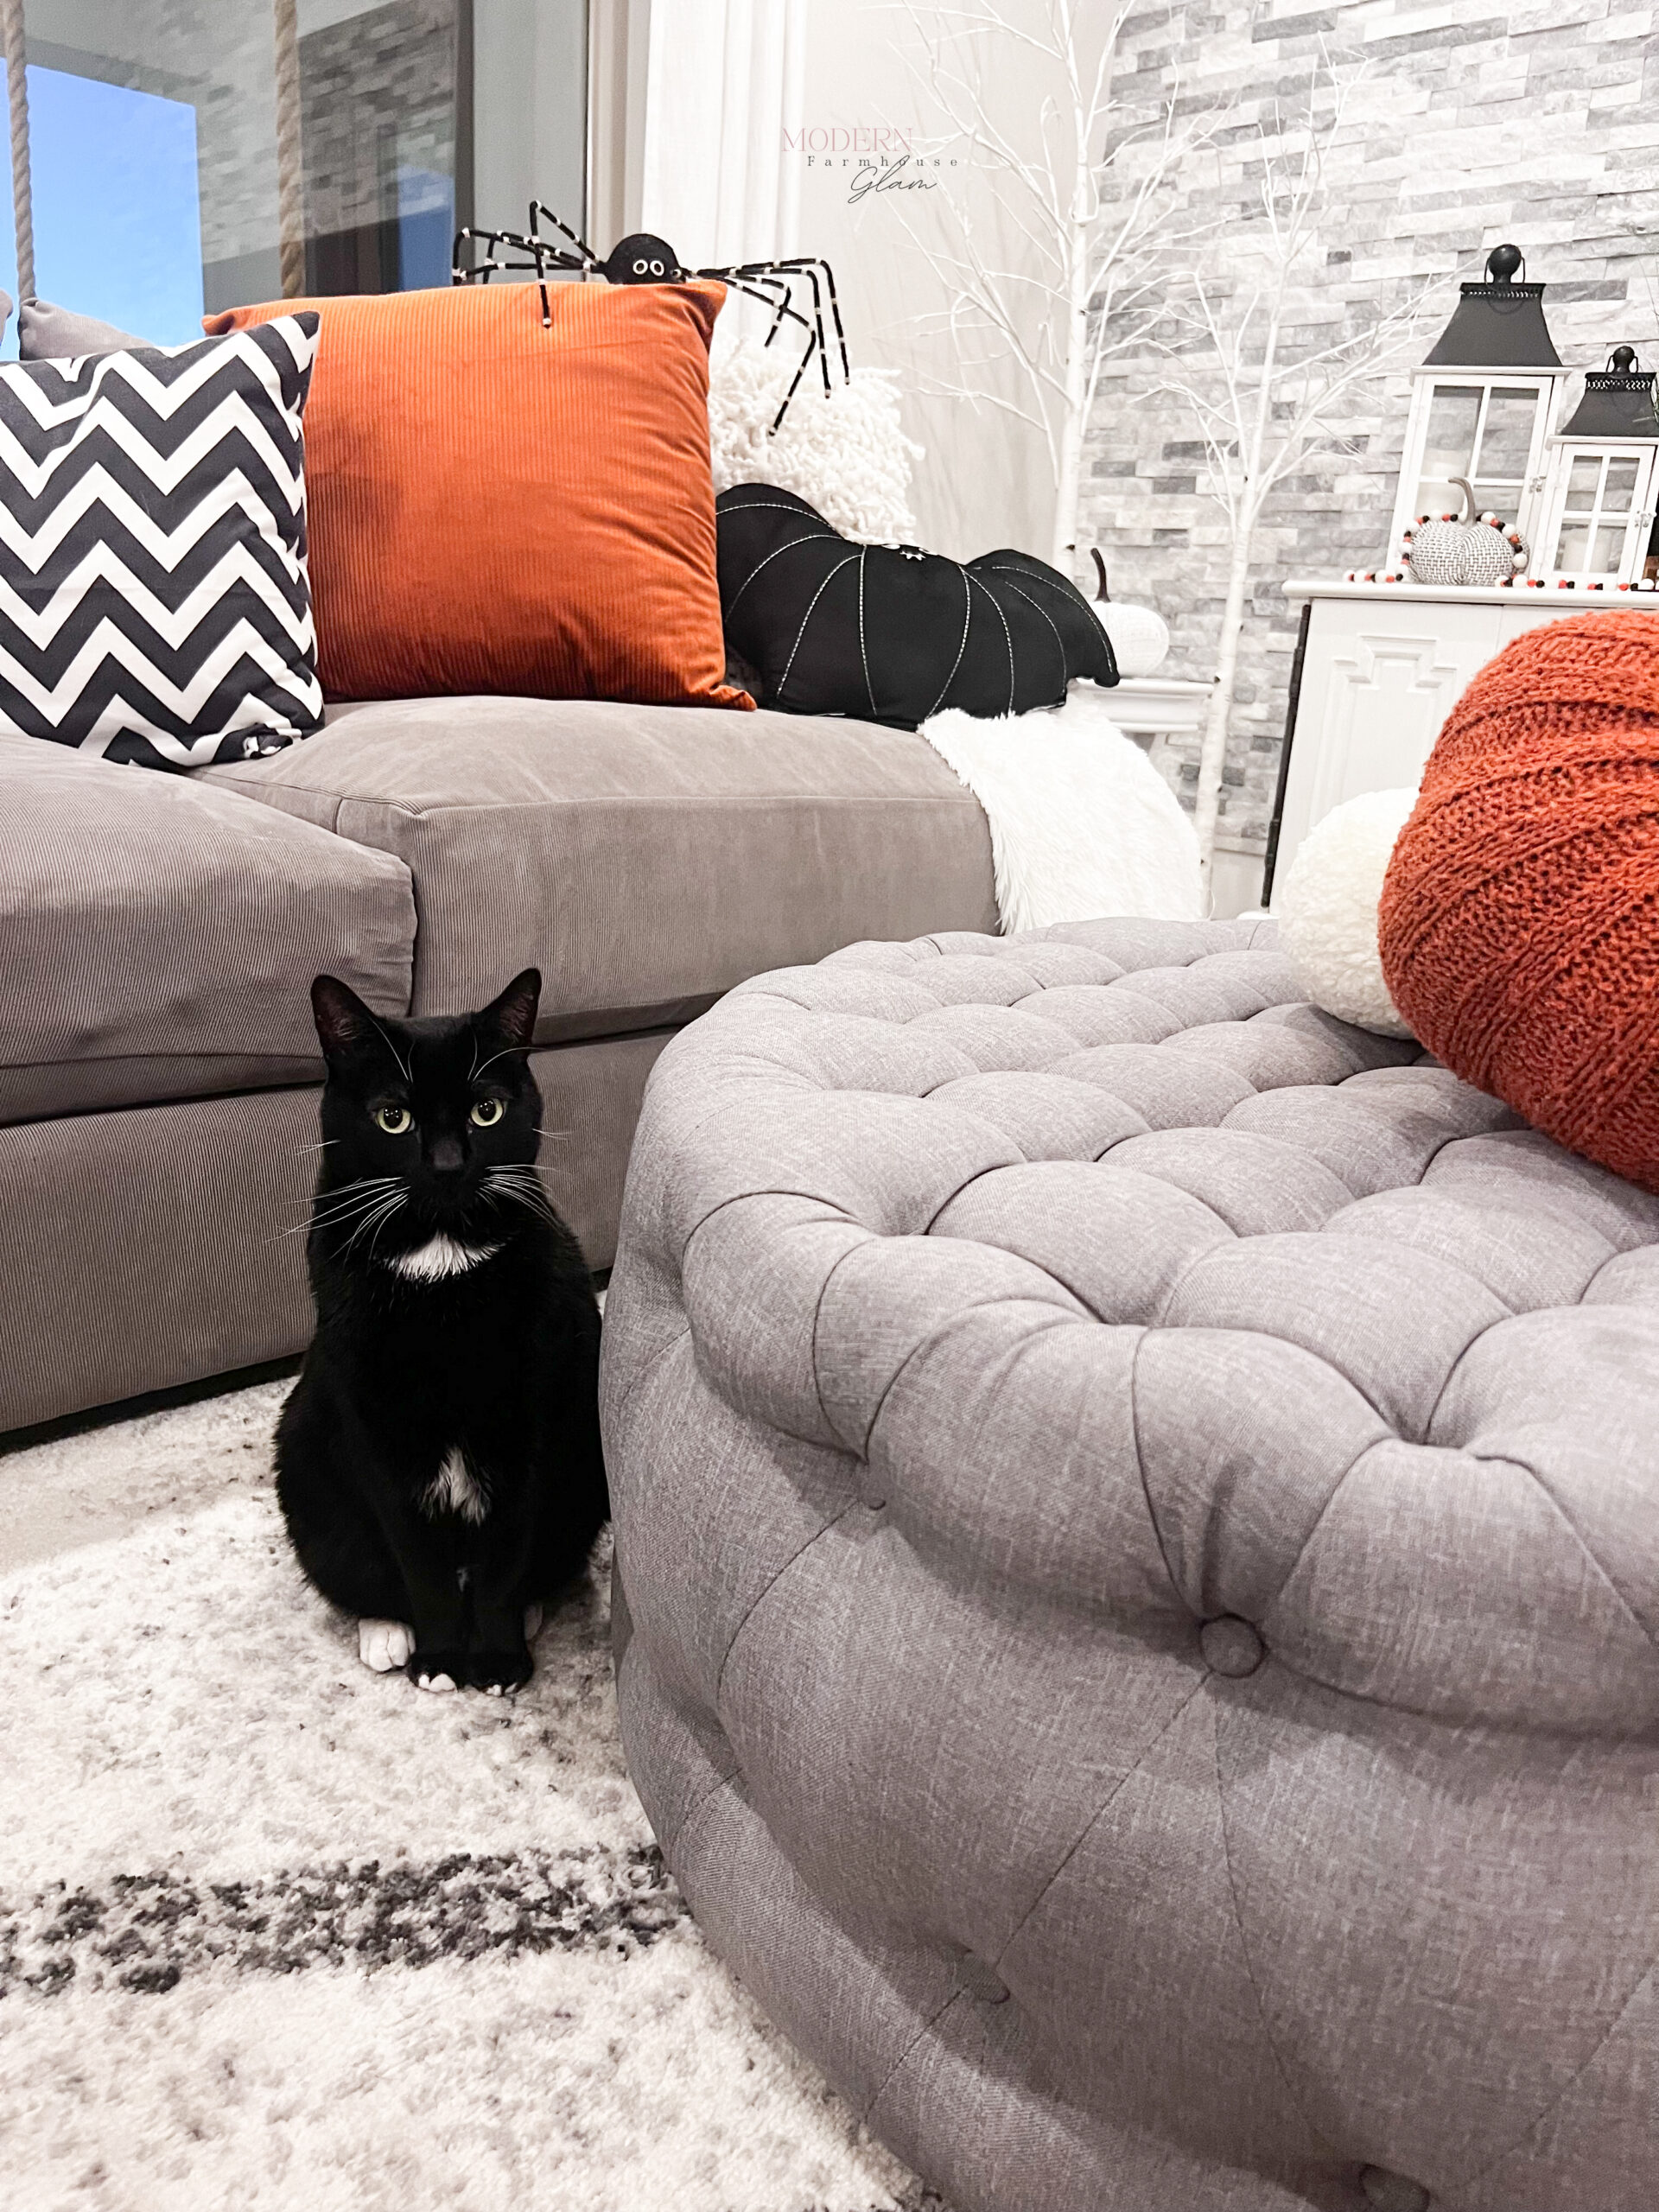 It's Oreo's time to shine! He's the cutest Halloween kitty, don't you think?